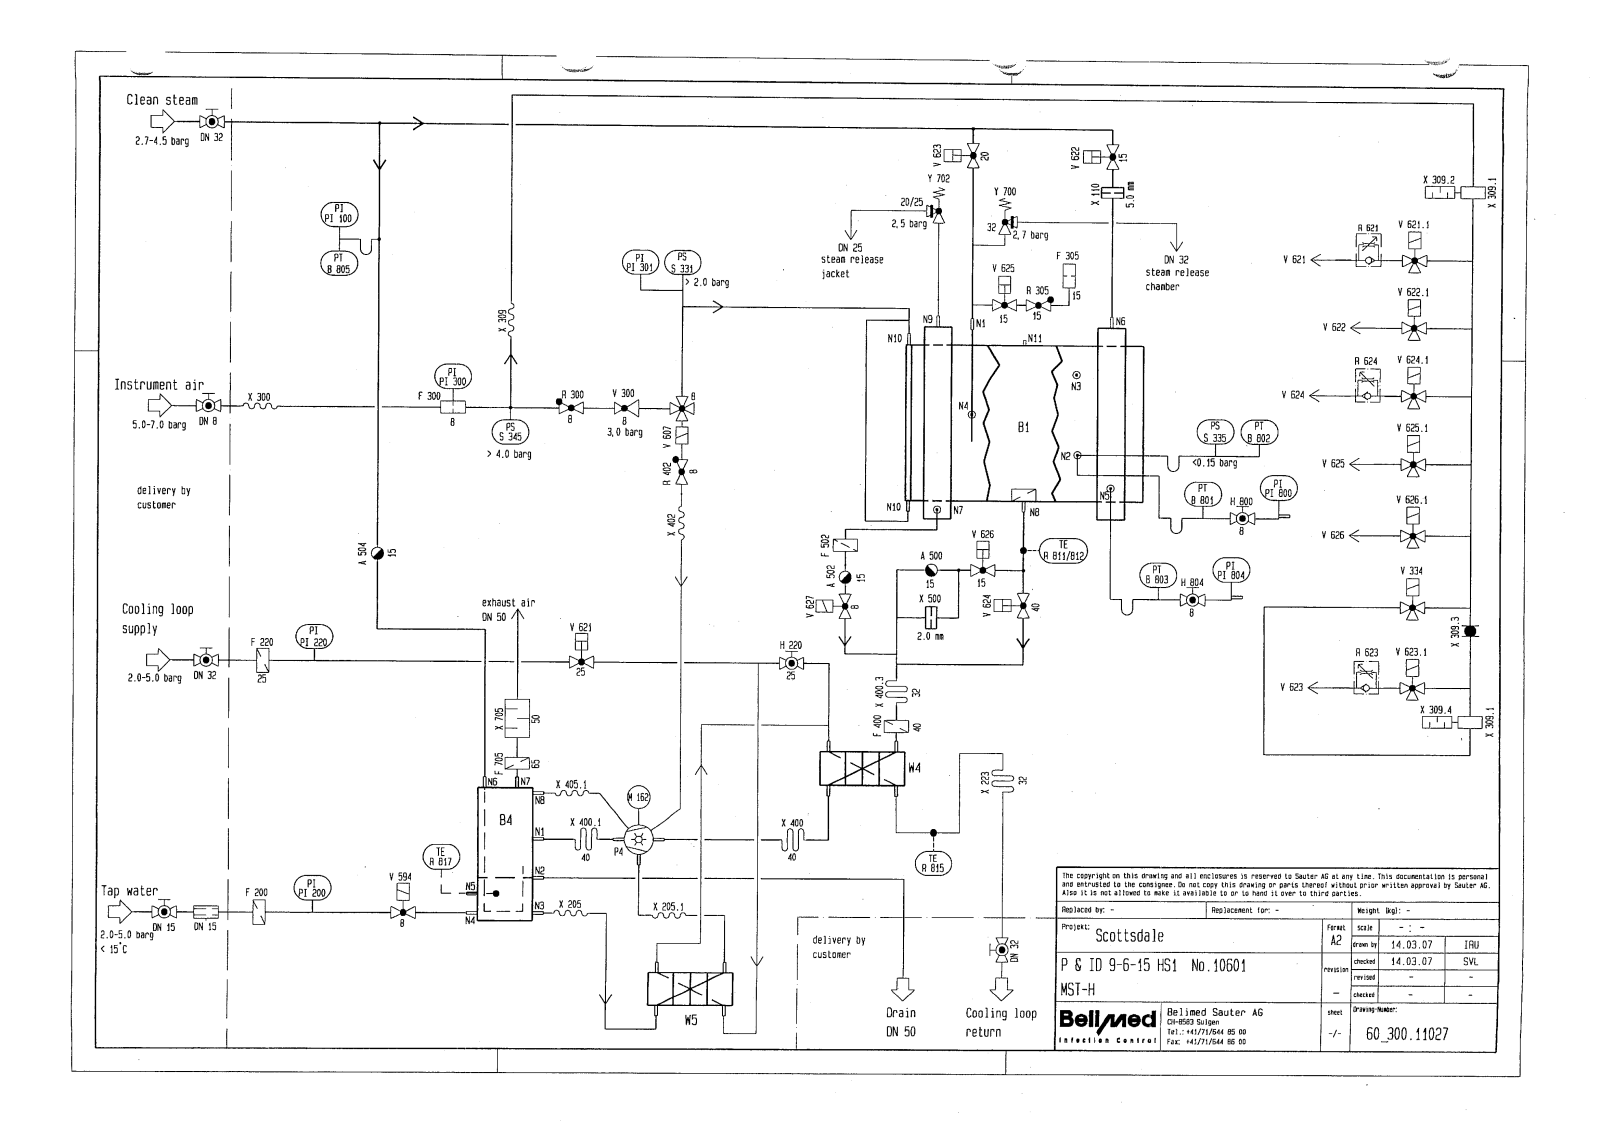 Belimed Sauter AG Schematic Diagrams